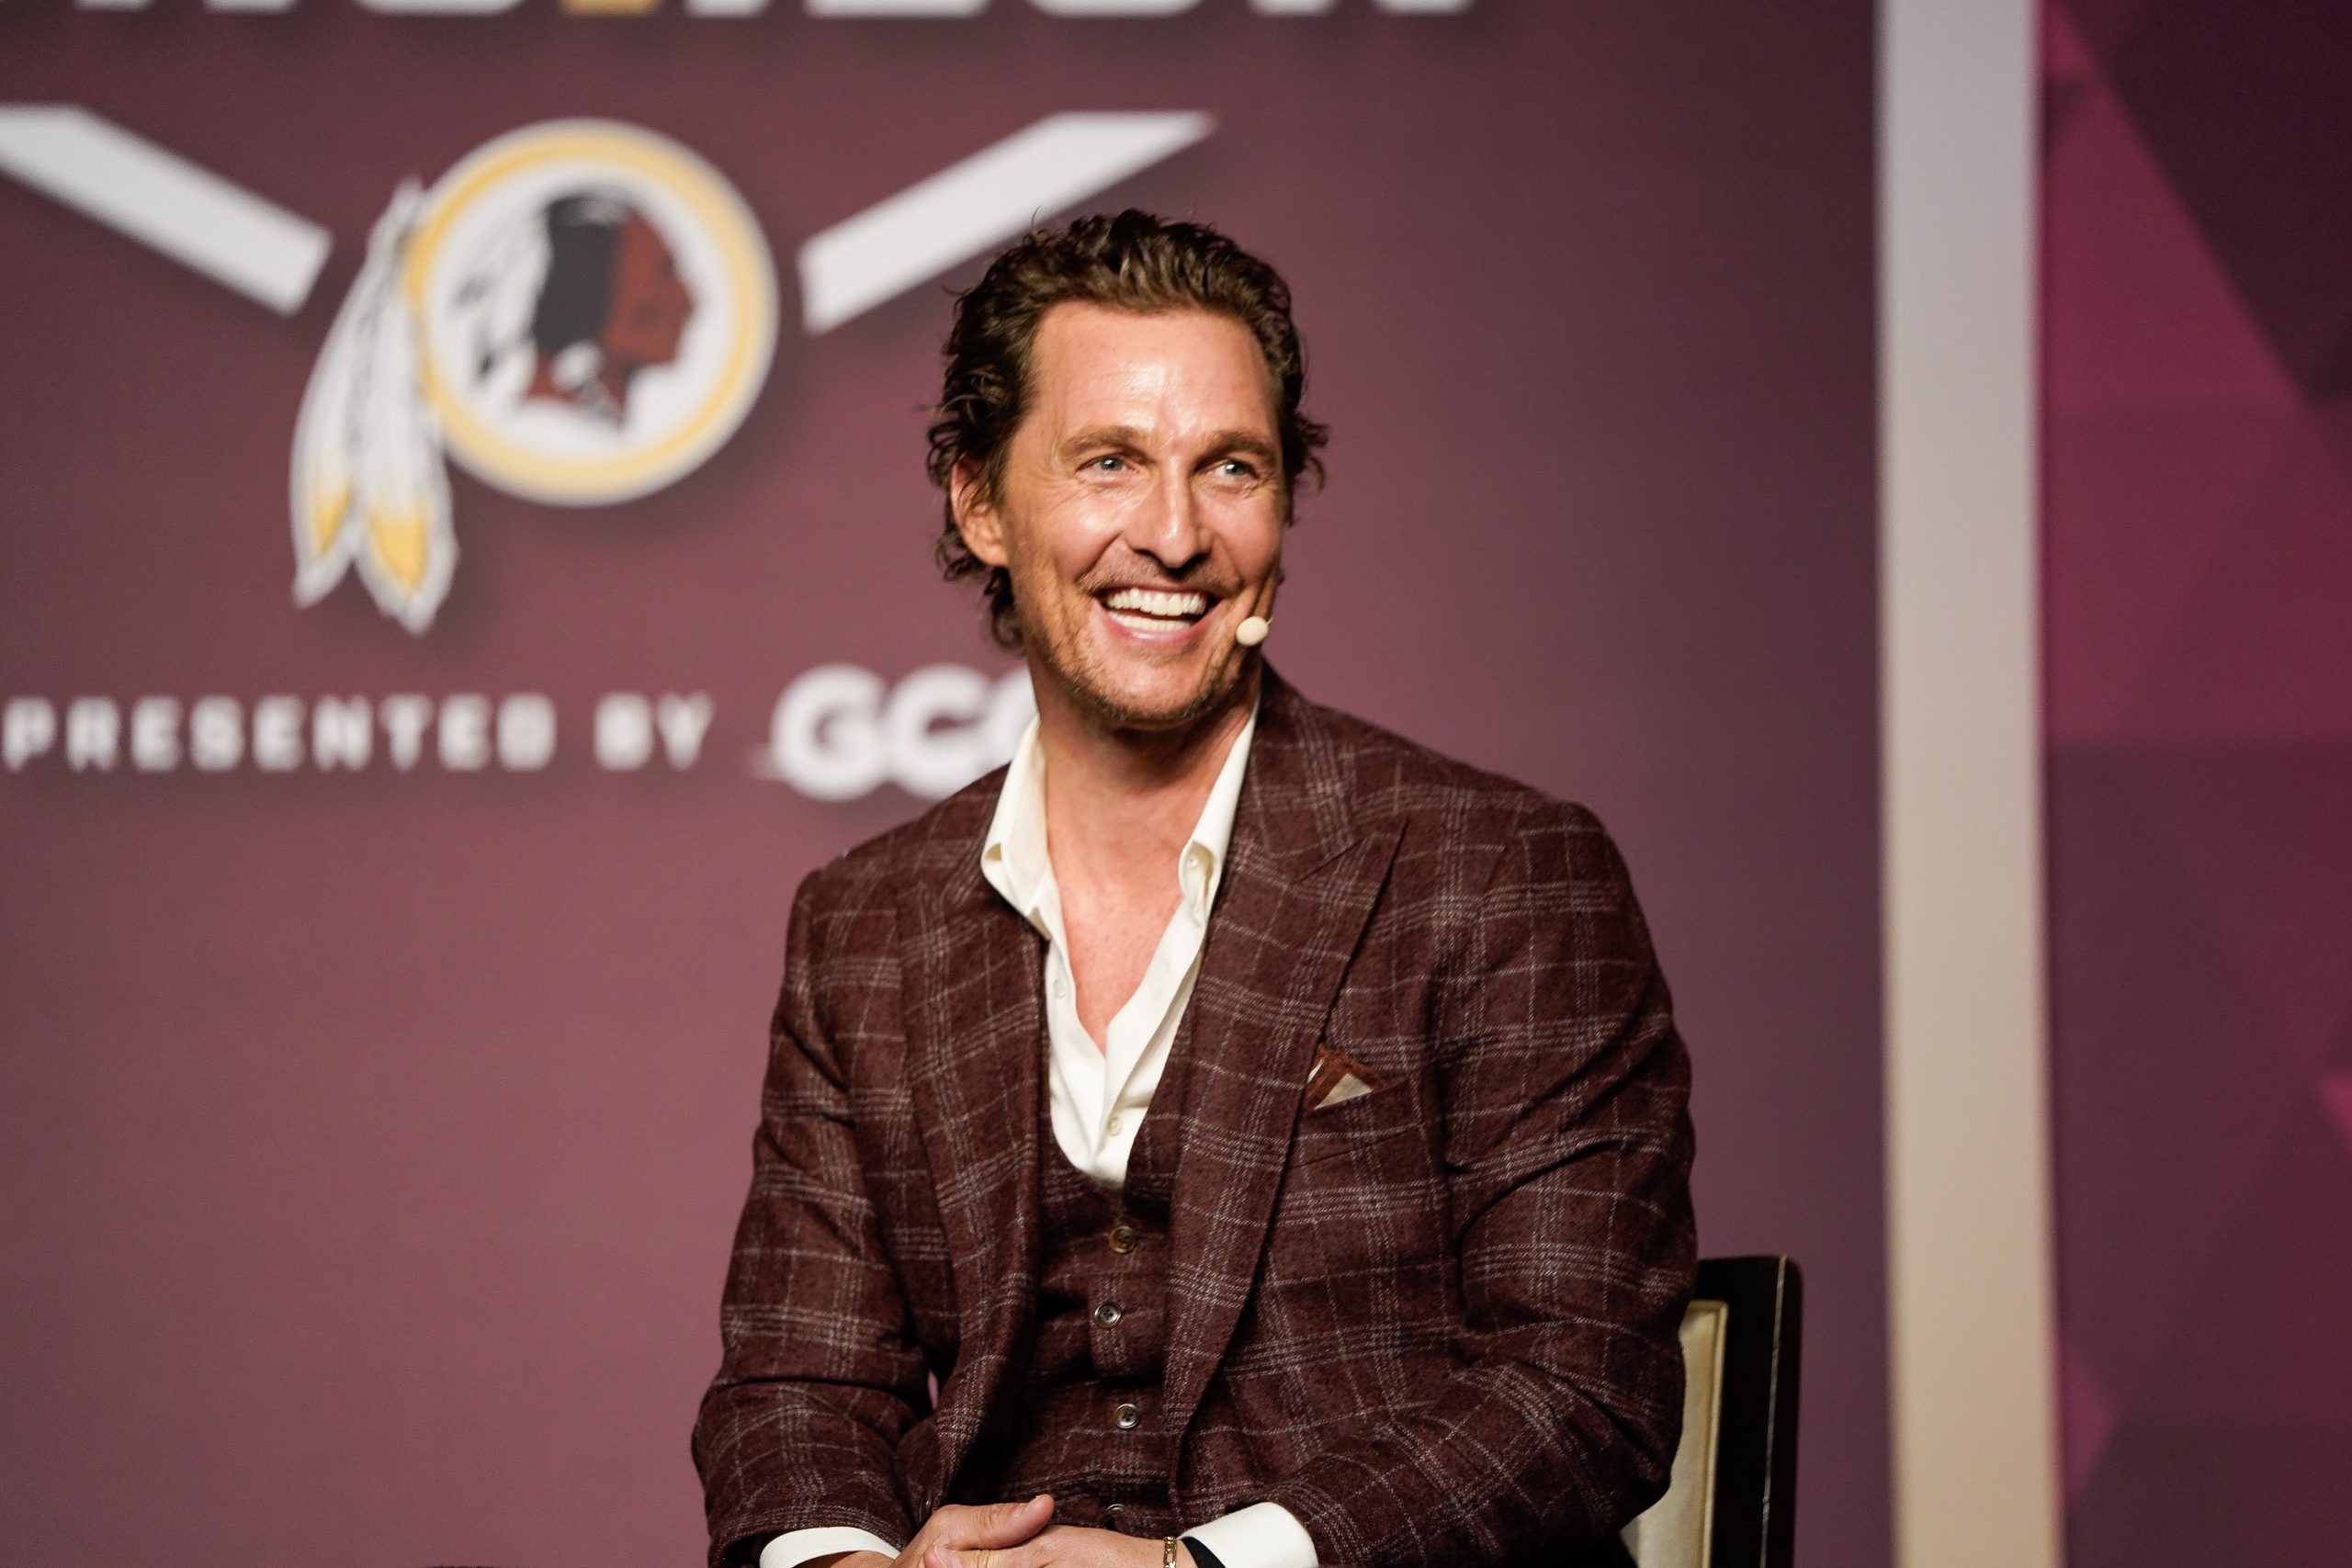 Matthew McConaughey's Wedding Anniversary Is A Blur Matthew McConaughey and His Wife Can't Remember It